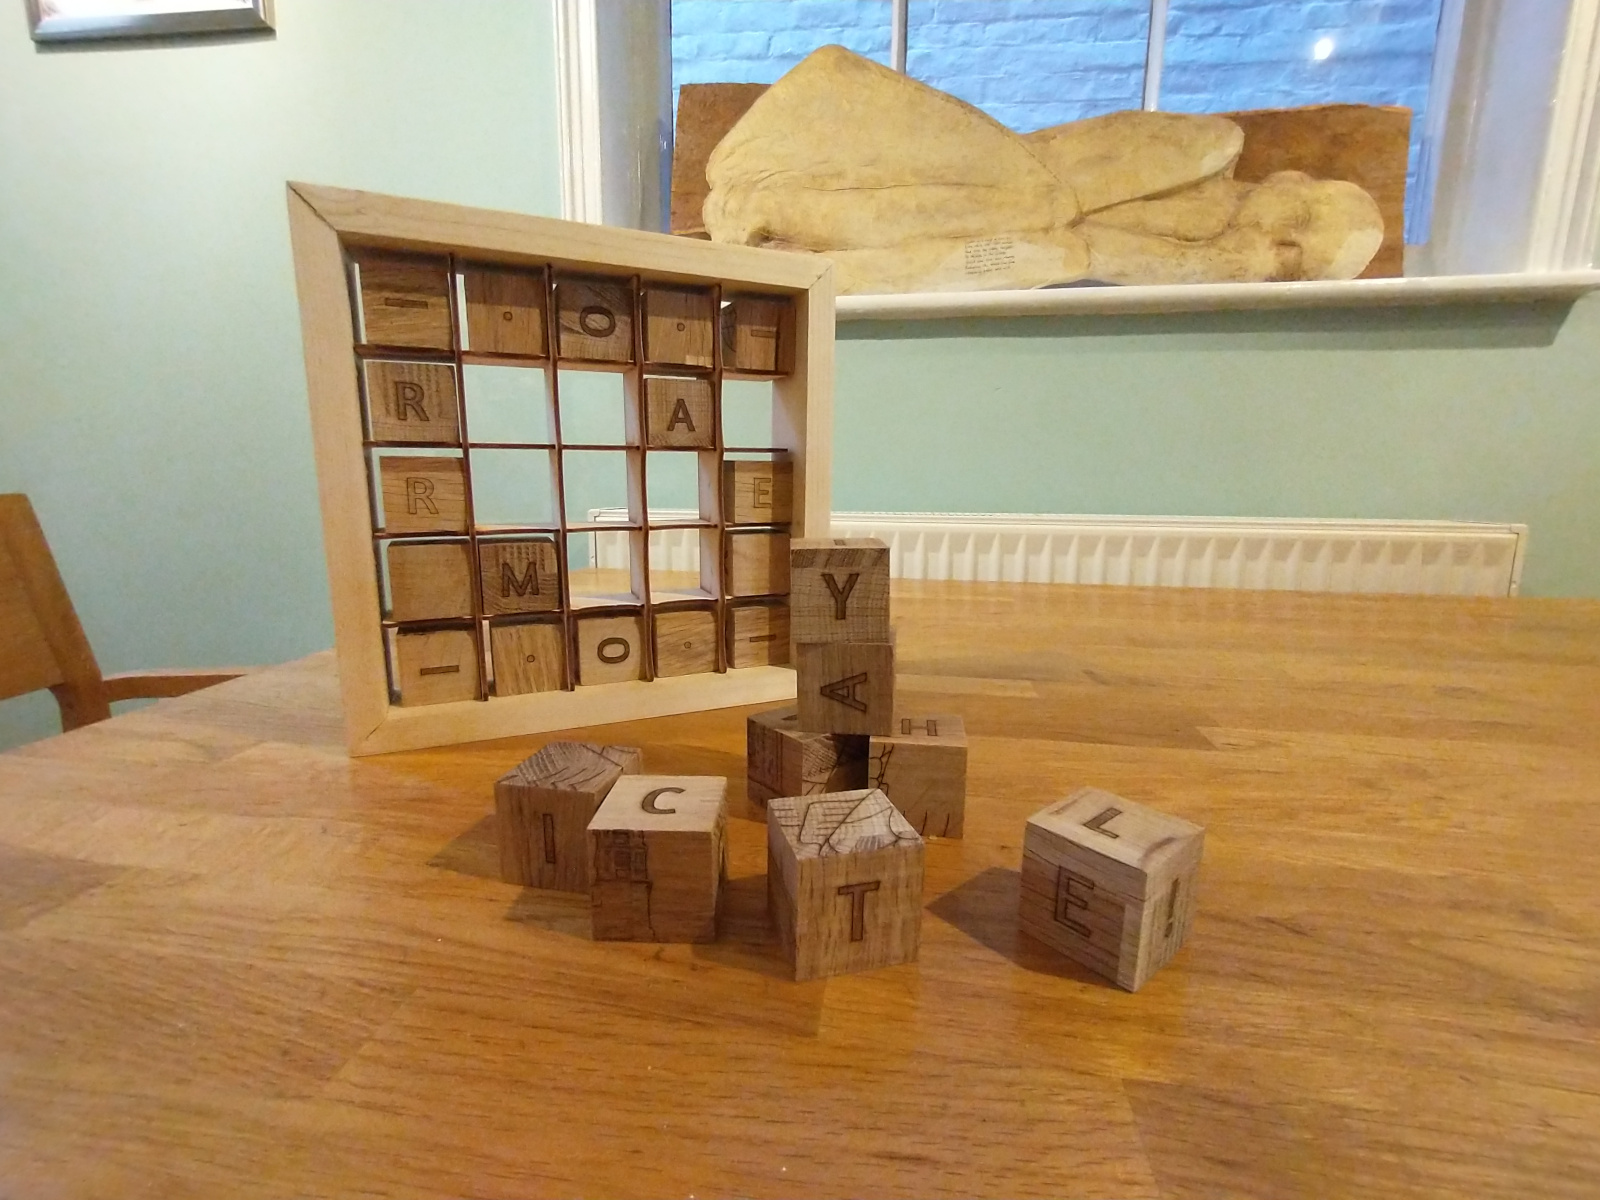 Escape room puzzle on the kitchen table, just waiting to be completed…